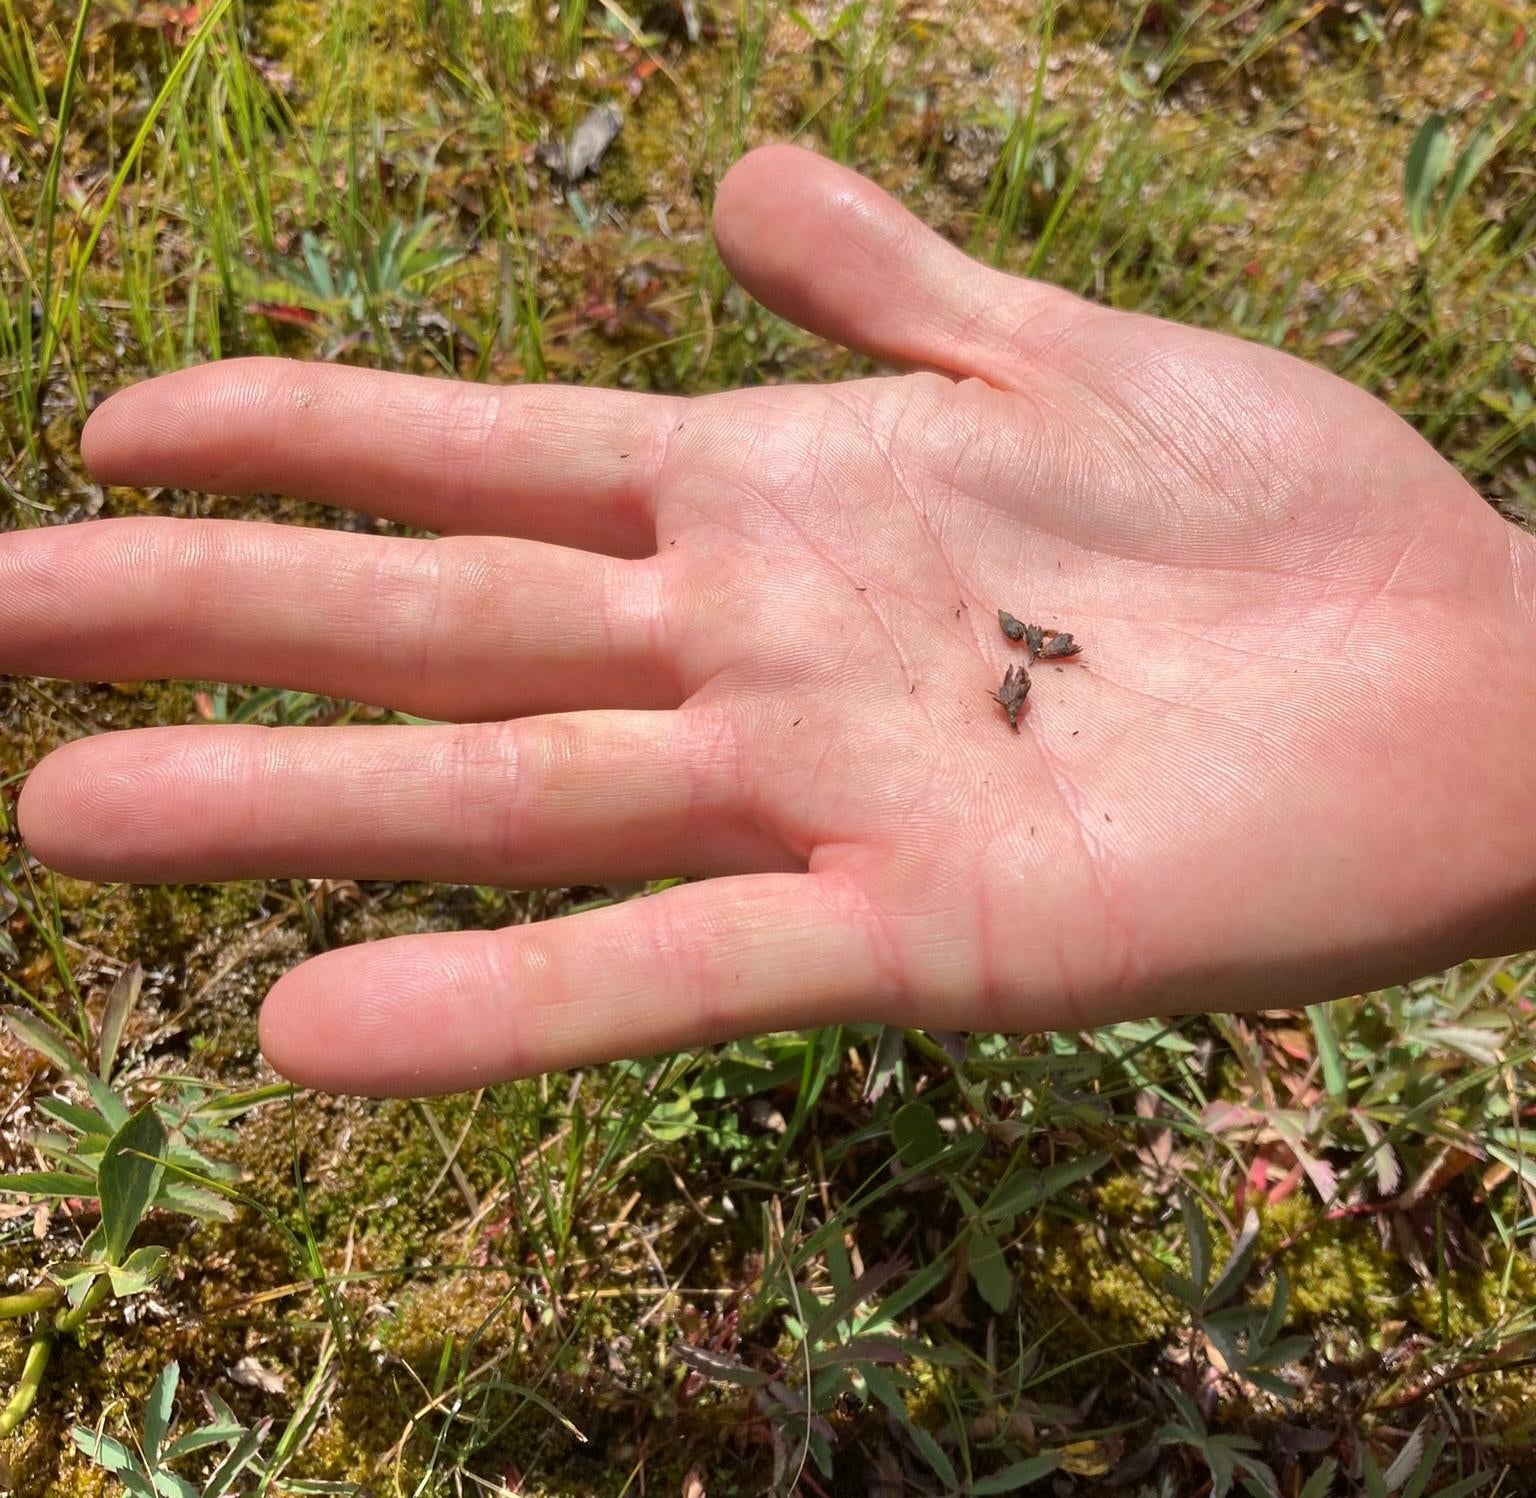 Here, one of the botanists holds up some of the collected sundew seeds — which are the tiny black flecks surrounding the desiccated flower parts in the middle. (Photo: Lauren Leffer / Gizmodo)